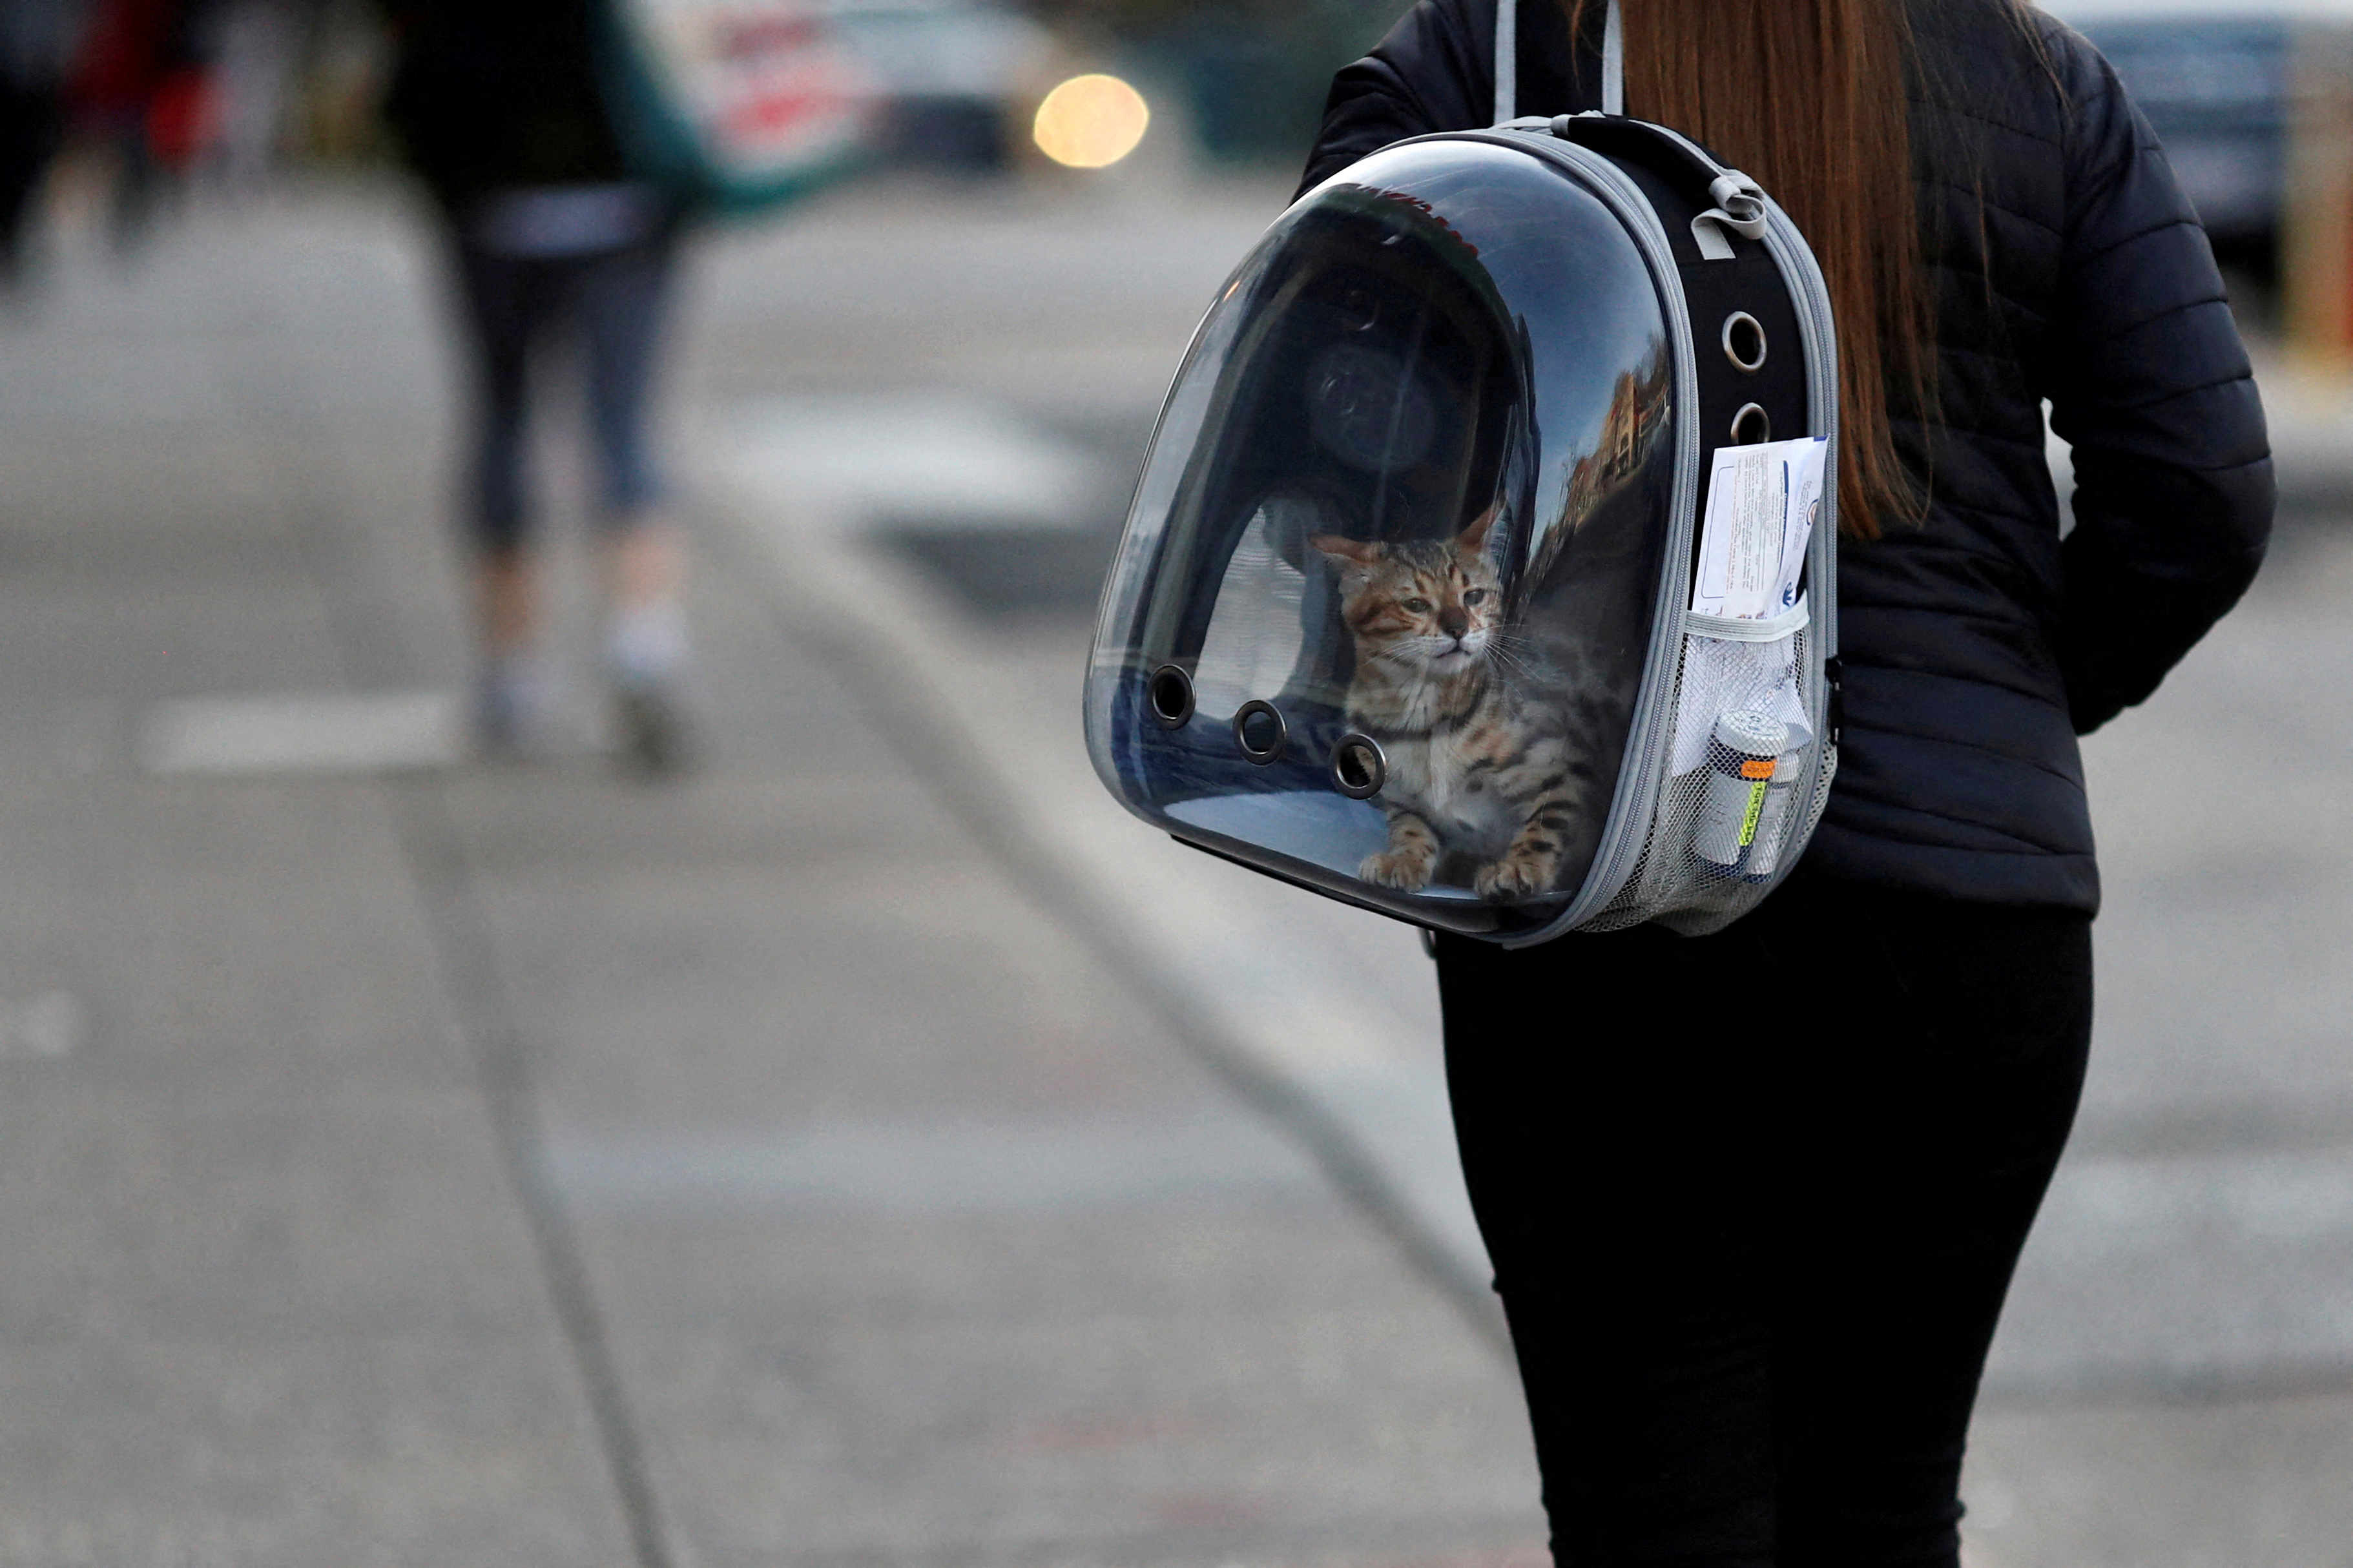 A woman carries her pet cat inside of a backpack as she walks along a street in downtown Washington, U.S., March 11, 2020. REUTERS/Carlos Barria